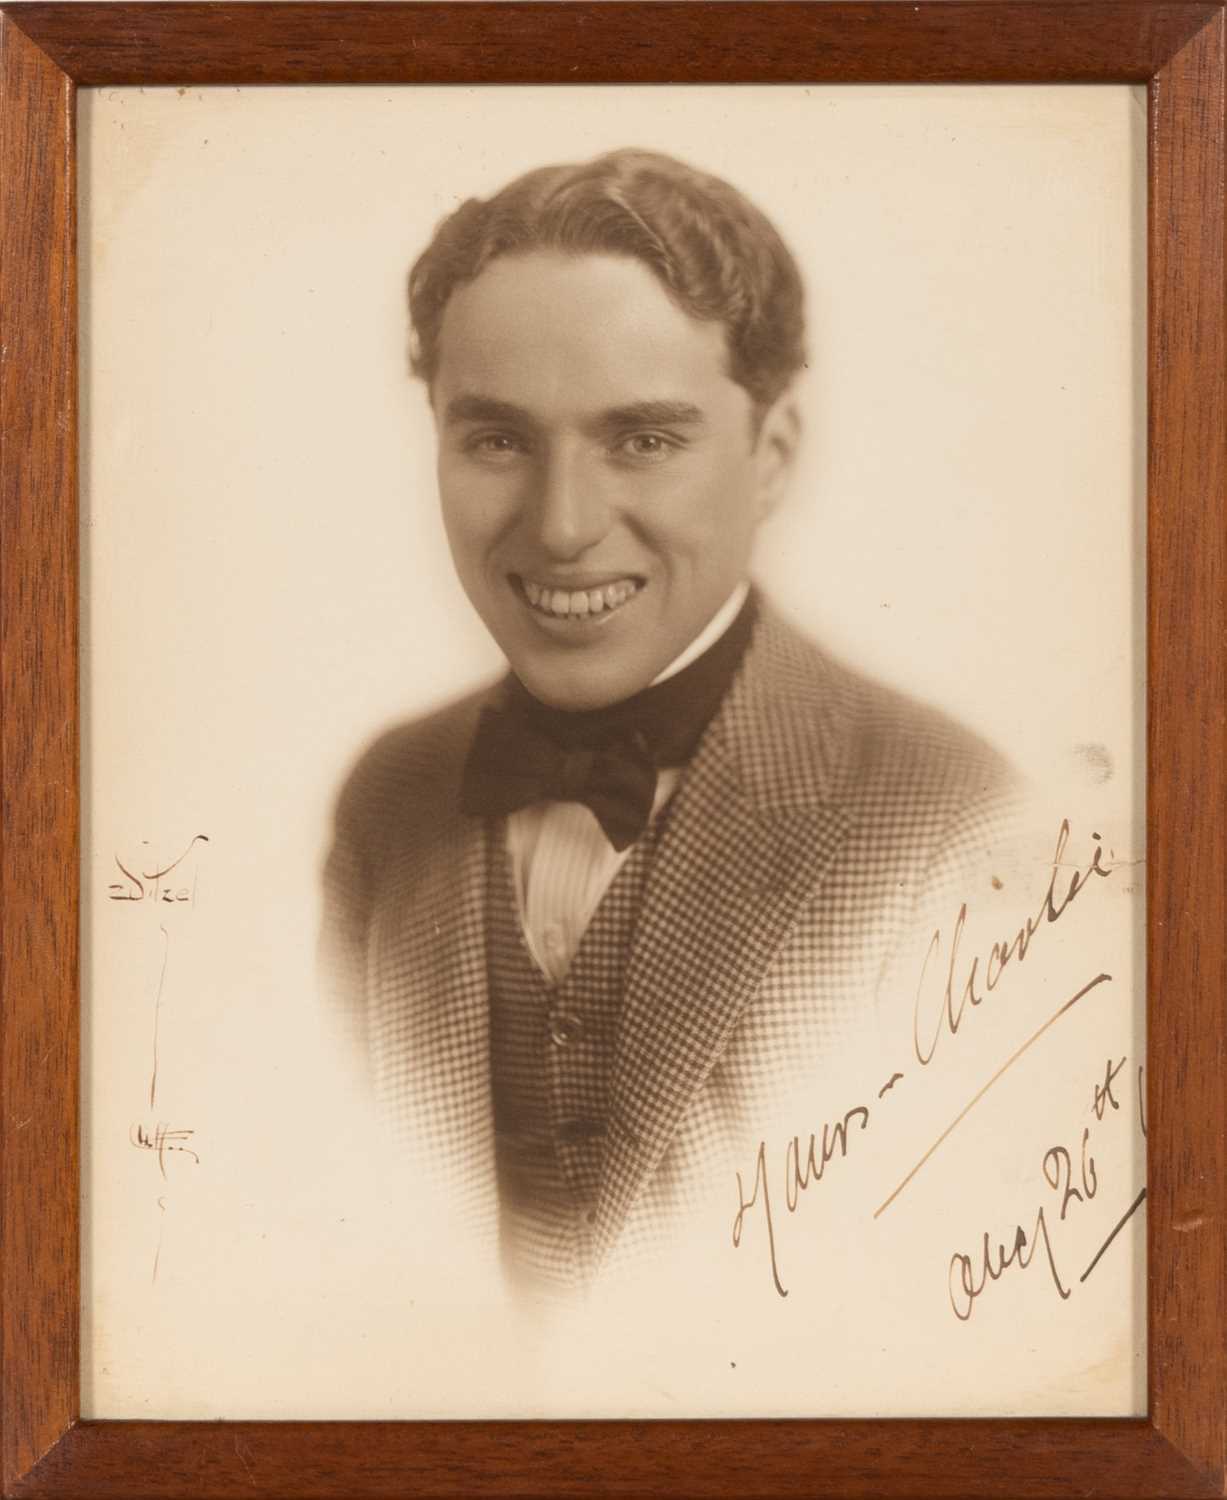 Lot 5051 - An early inscribed photograph of Charlie Chaplin